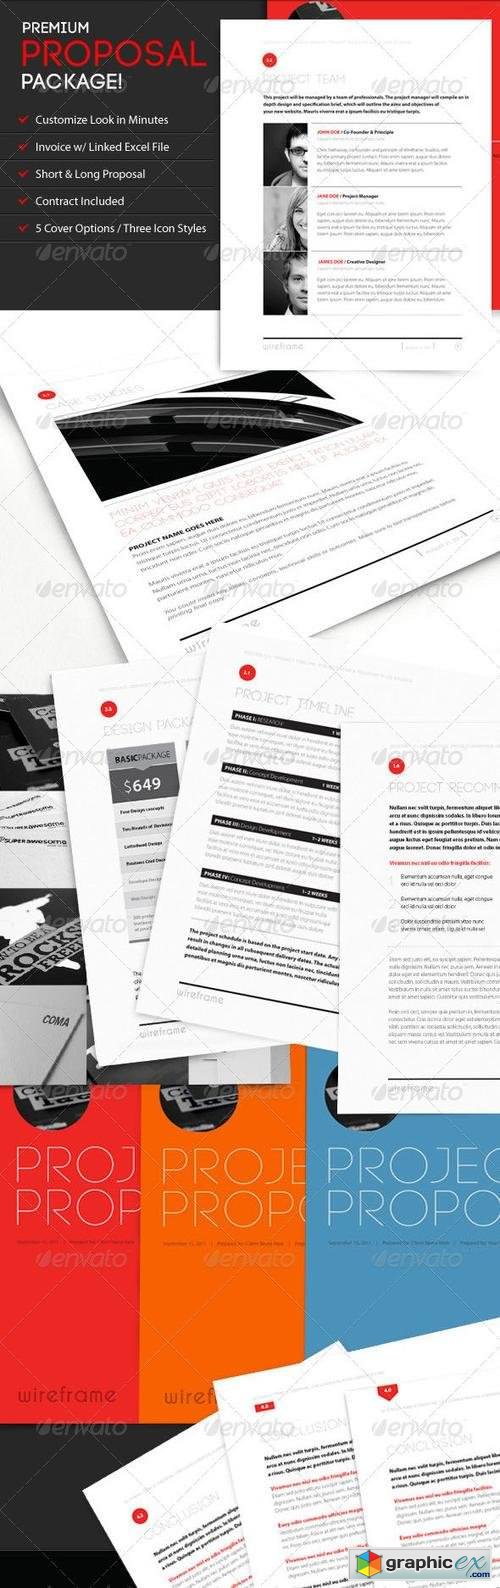 Wireframe: Proposal Template w/ Invoice & Contract